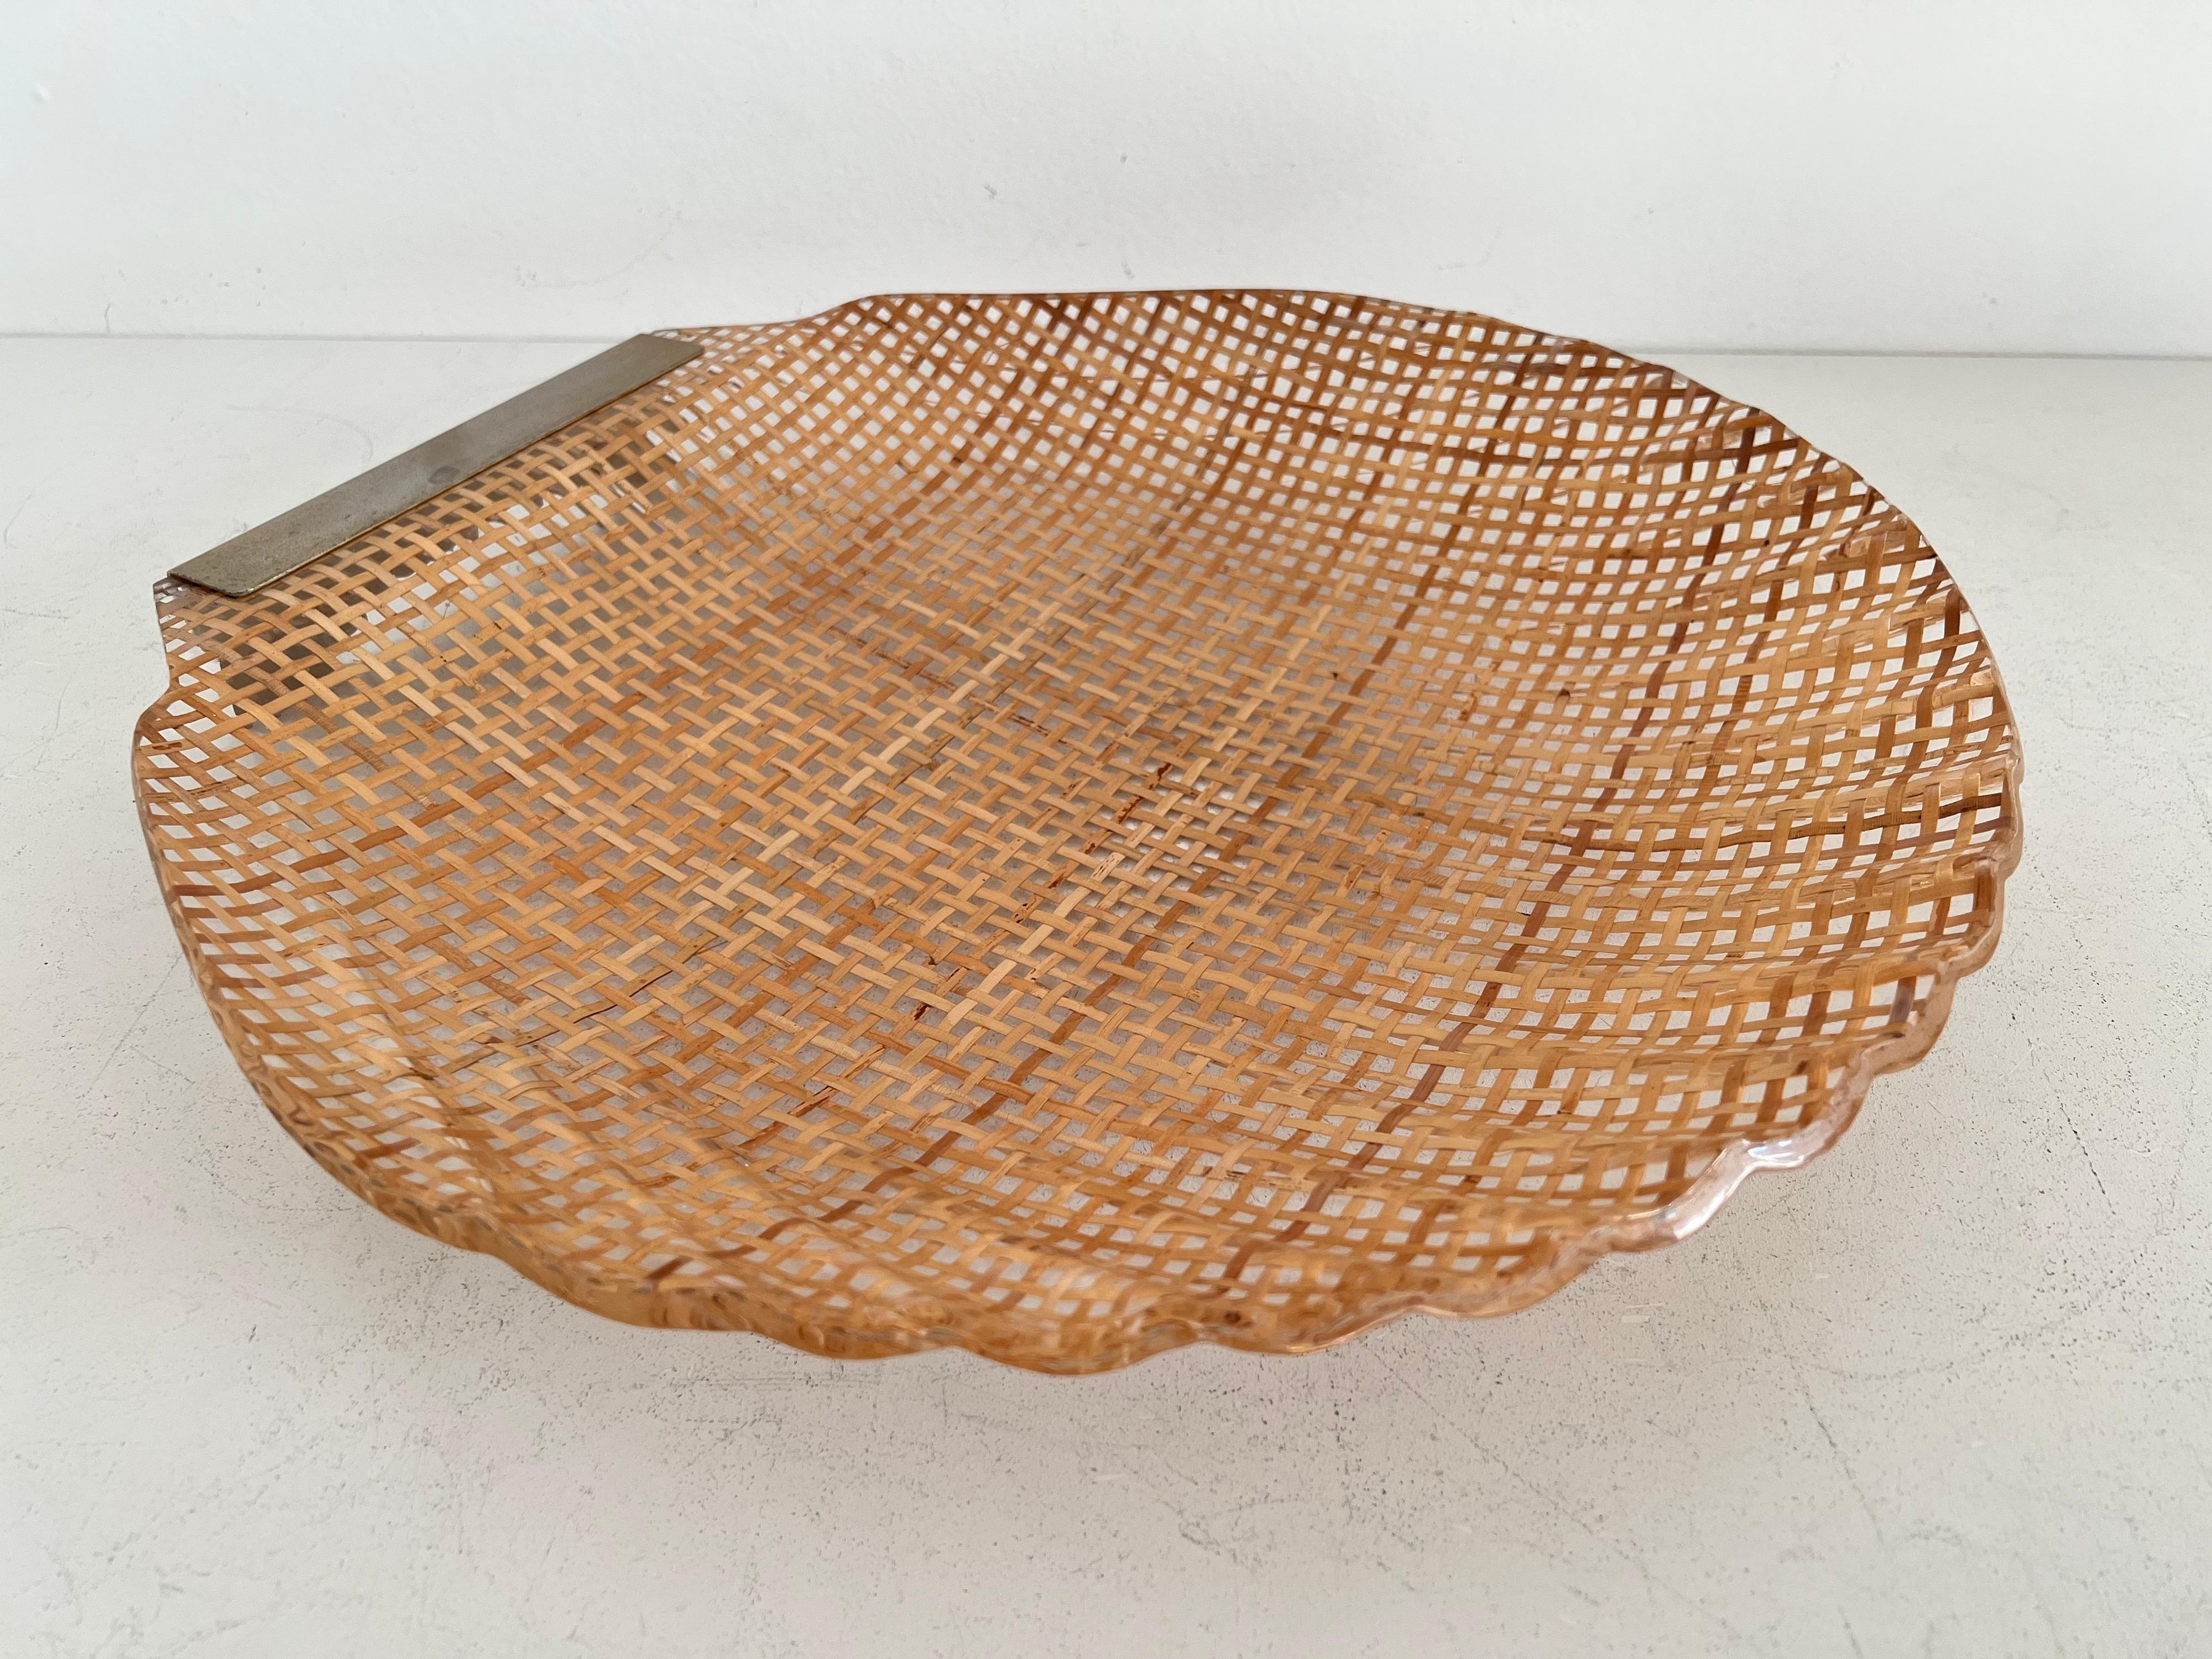 Italian MidCentury Serving Tray in Lucite, Rattan and Brass in Shell Shape, 1970 For Sale 3